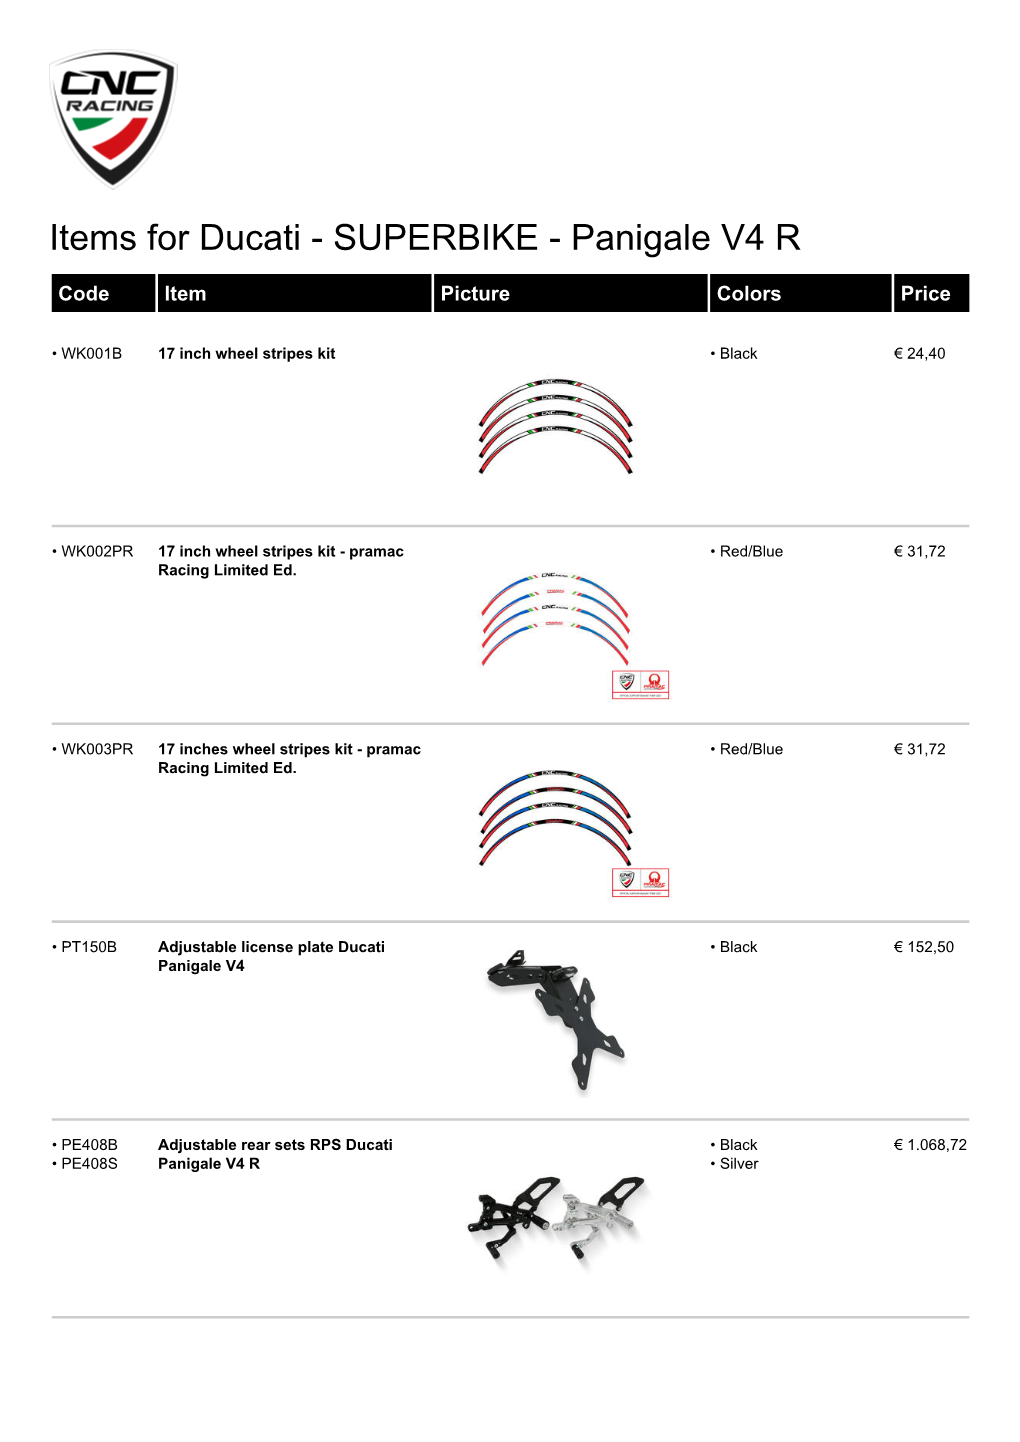 Items for Ducati - SUPERBIKE - Panigale V4 R